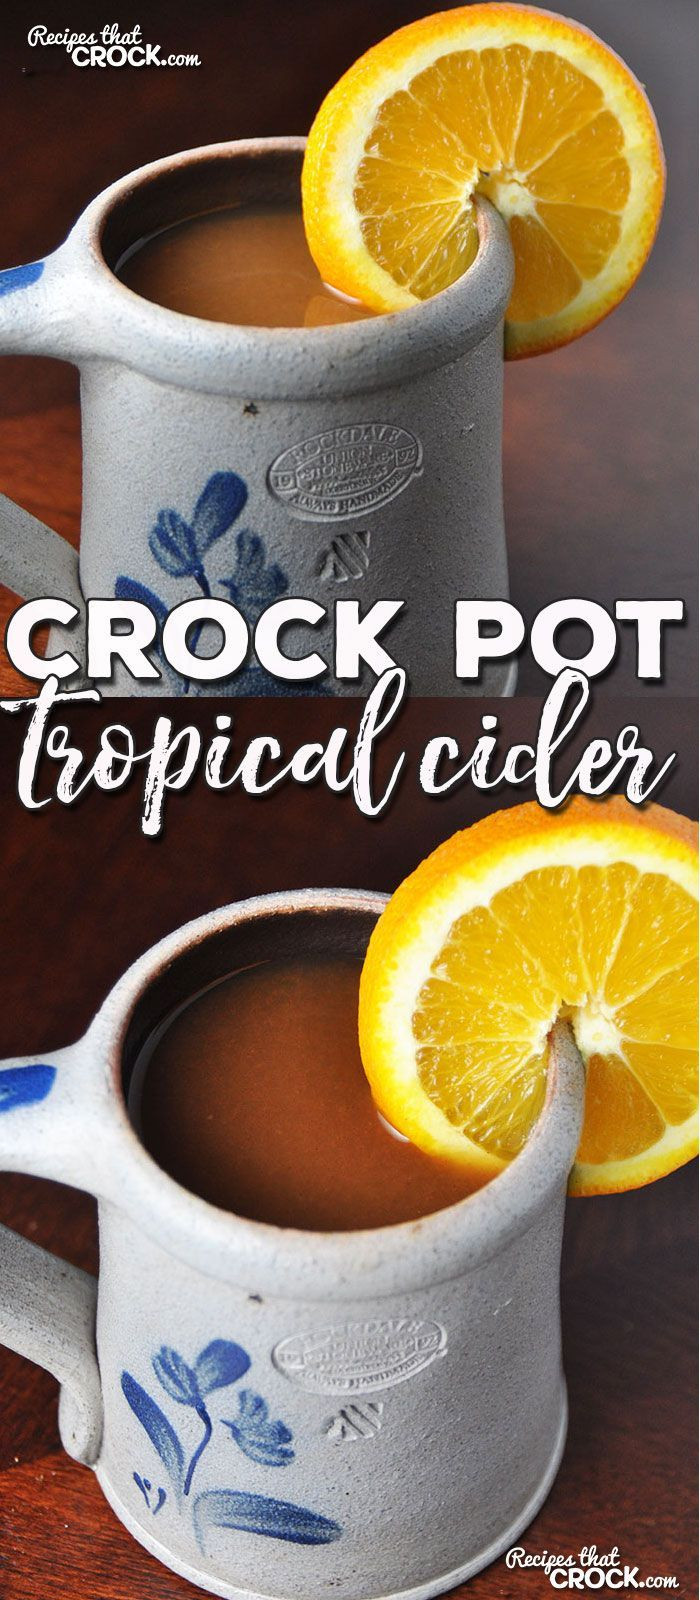 Crock Pot Recipes Kids Like
 This Crock Pot Tropical Cider is super simple to throw